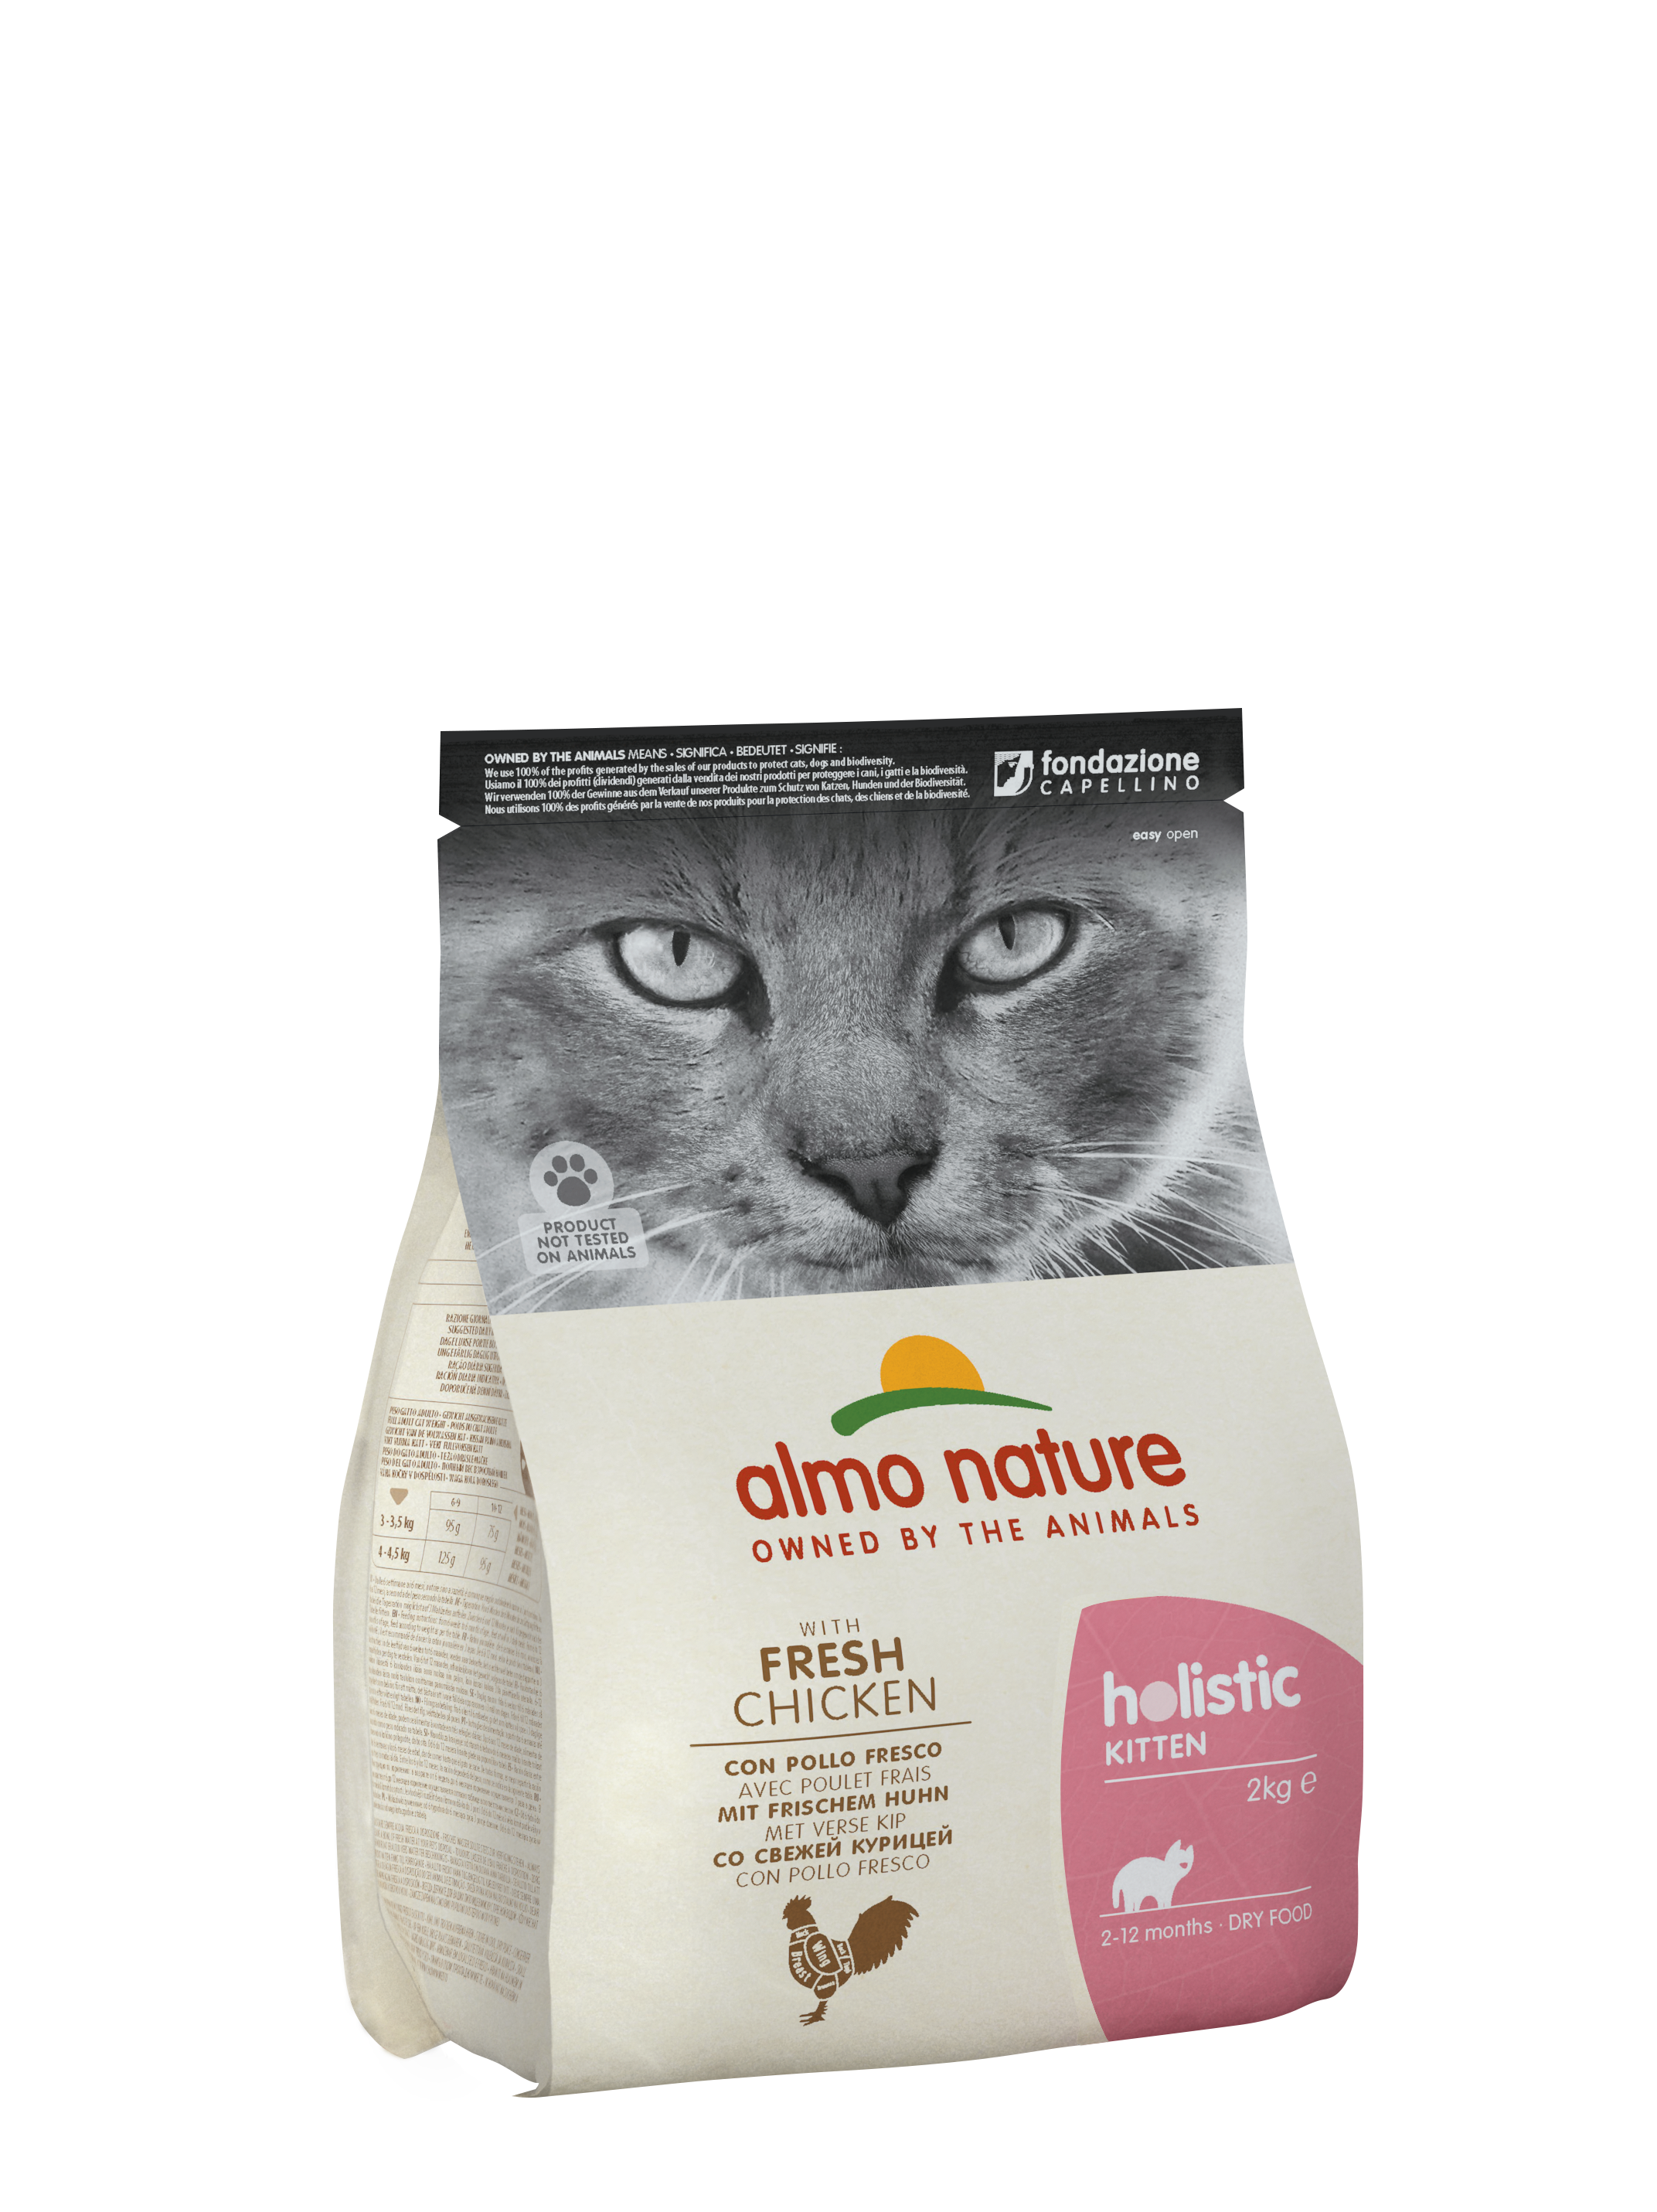 Almo Nature - HOLISTIC Maintenance Kitten with Fresh Chicken Dry Food 2kg for Cats